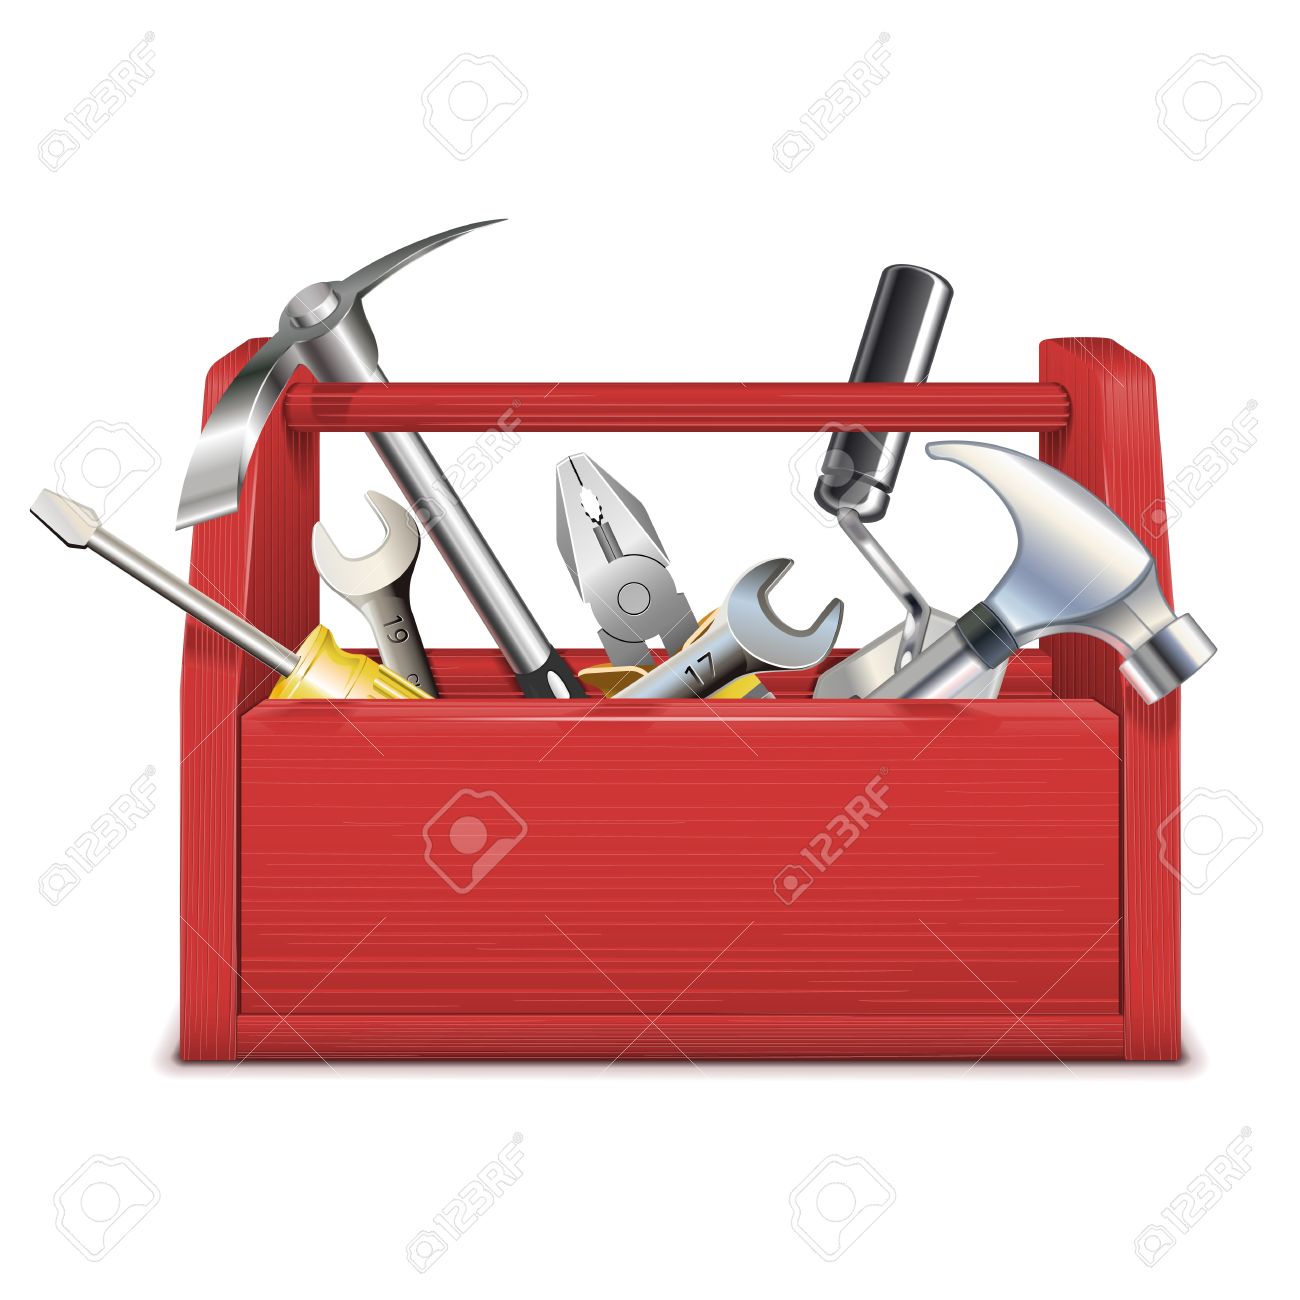 10,983 Toolbox Stock Vector Illustration And Royalty Free Toolbox.